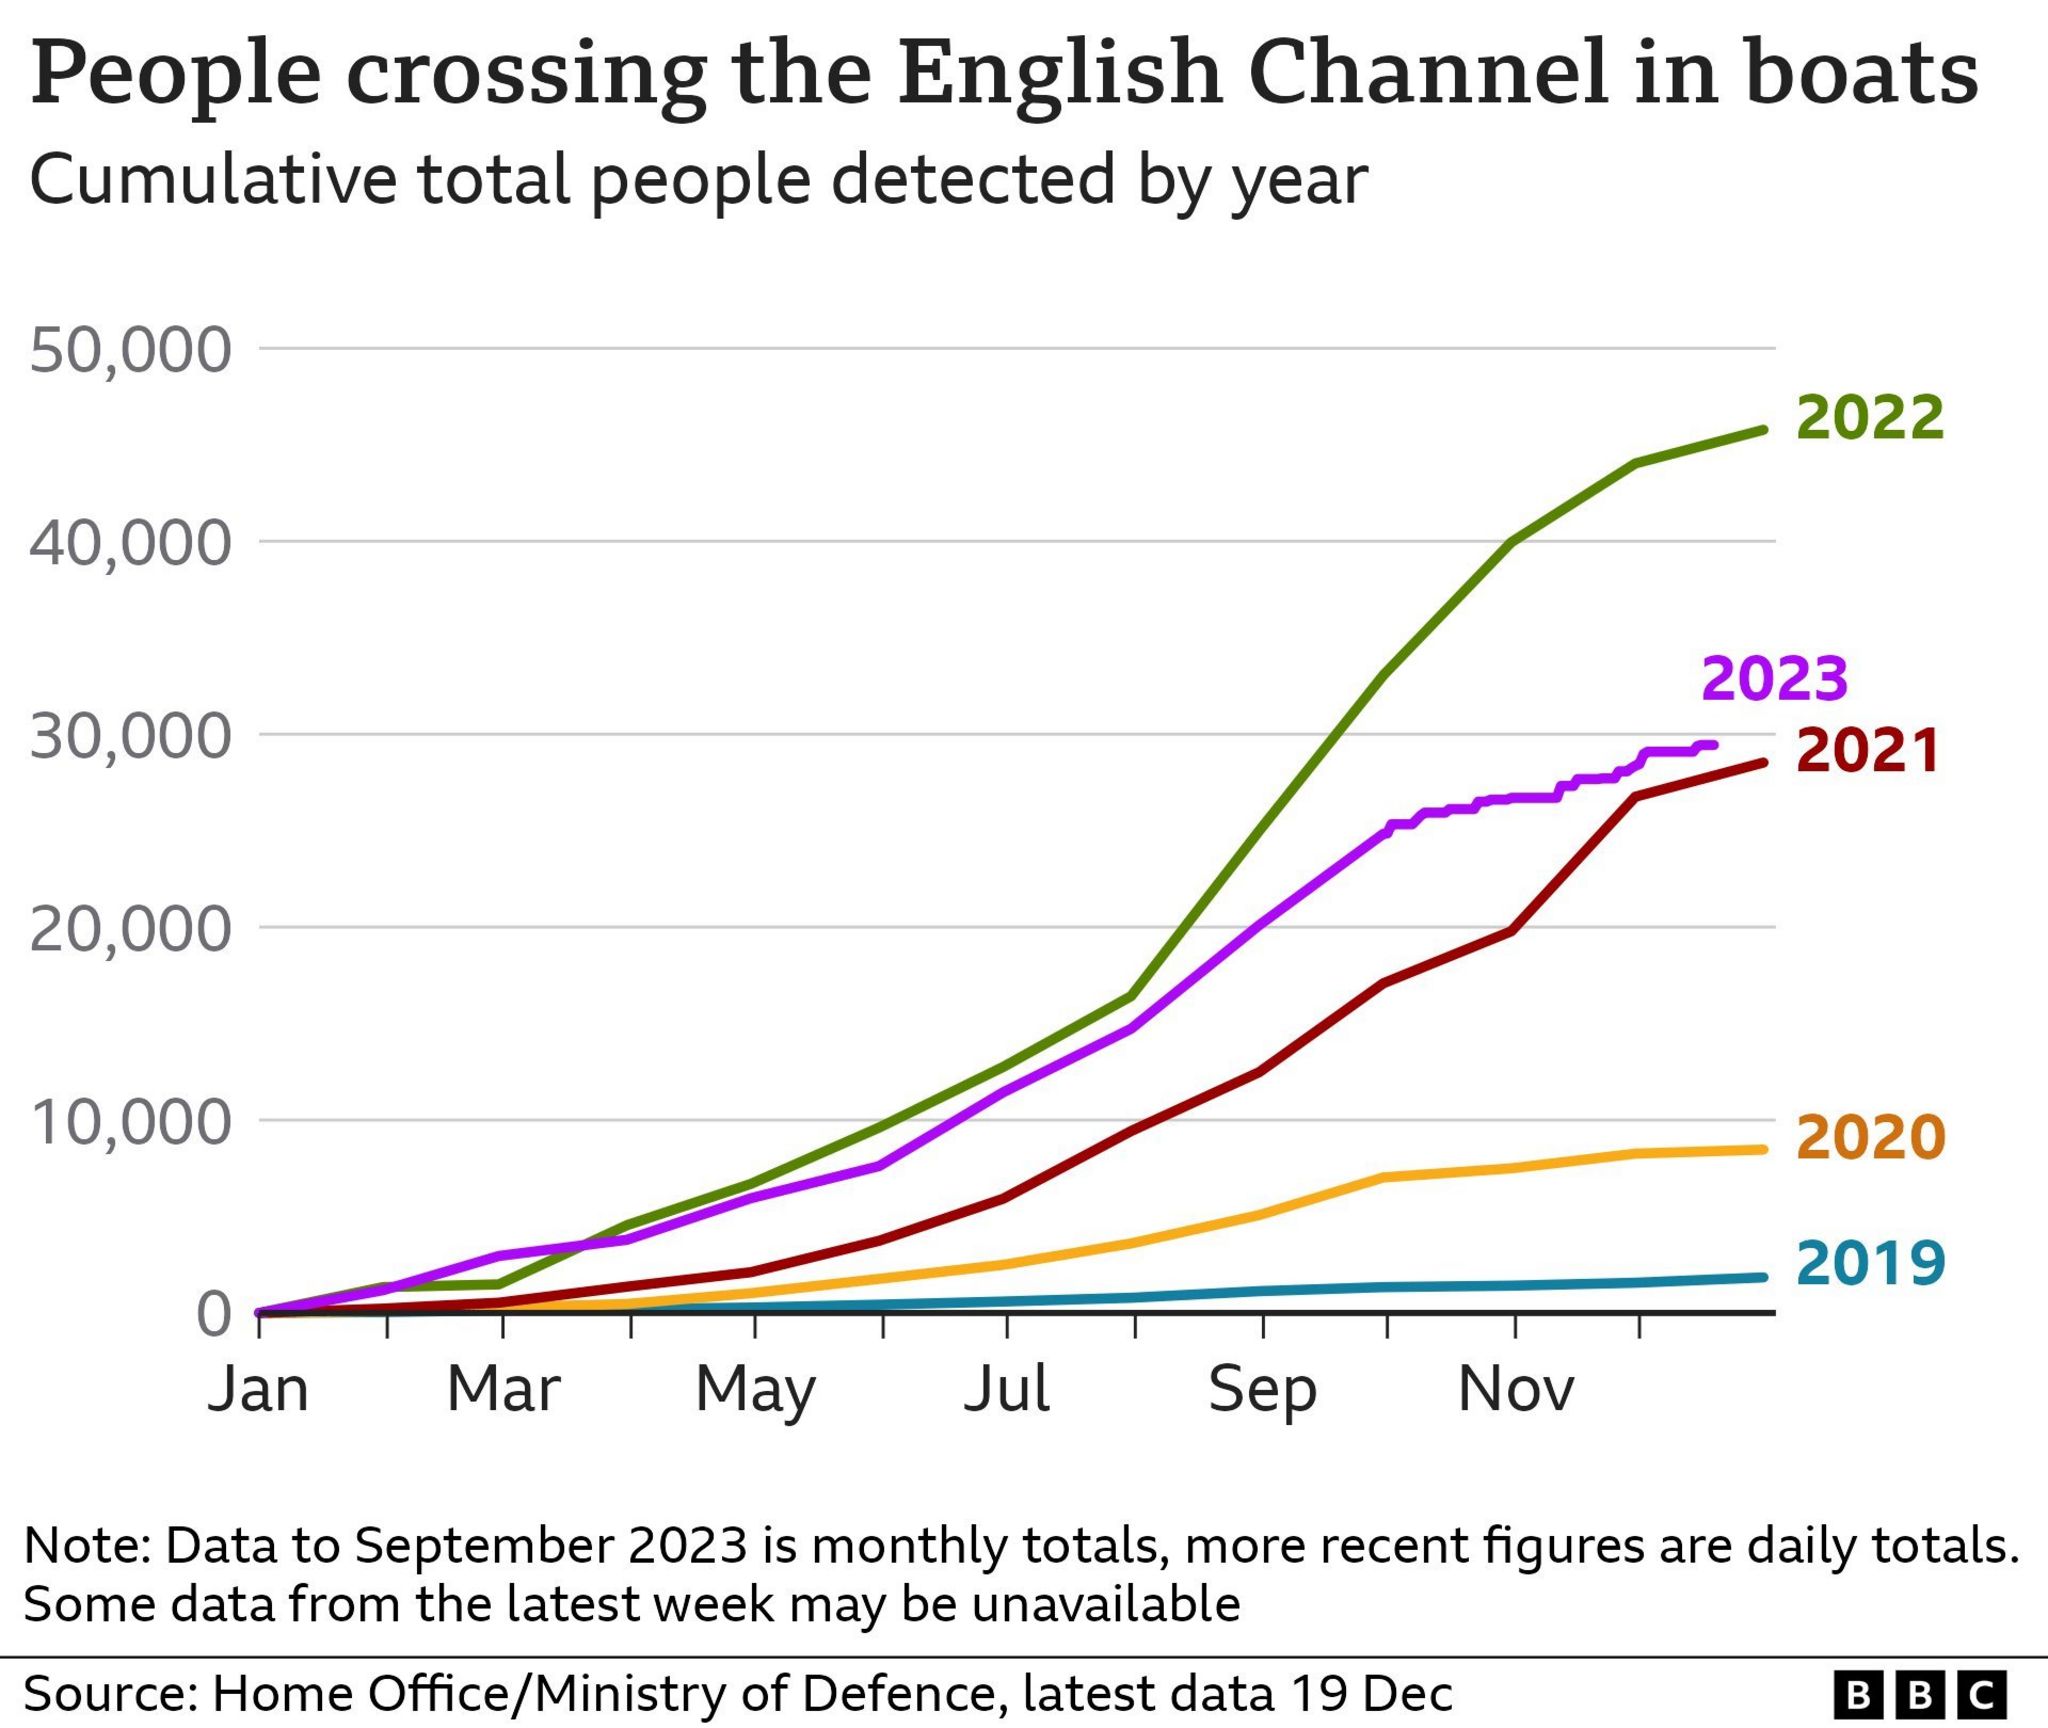 A graph showing the number of people crossing the English Channel in boats